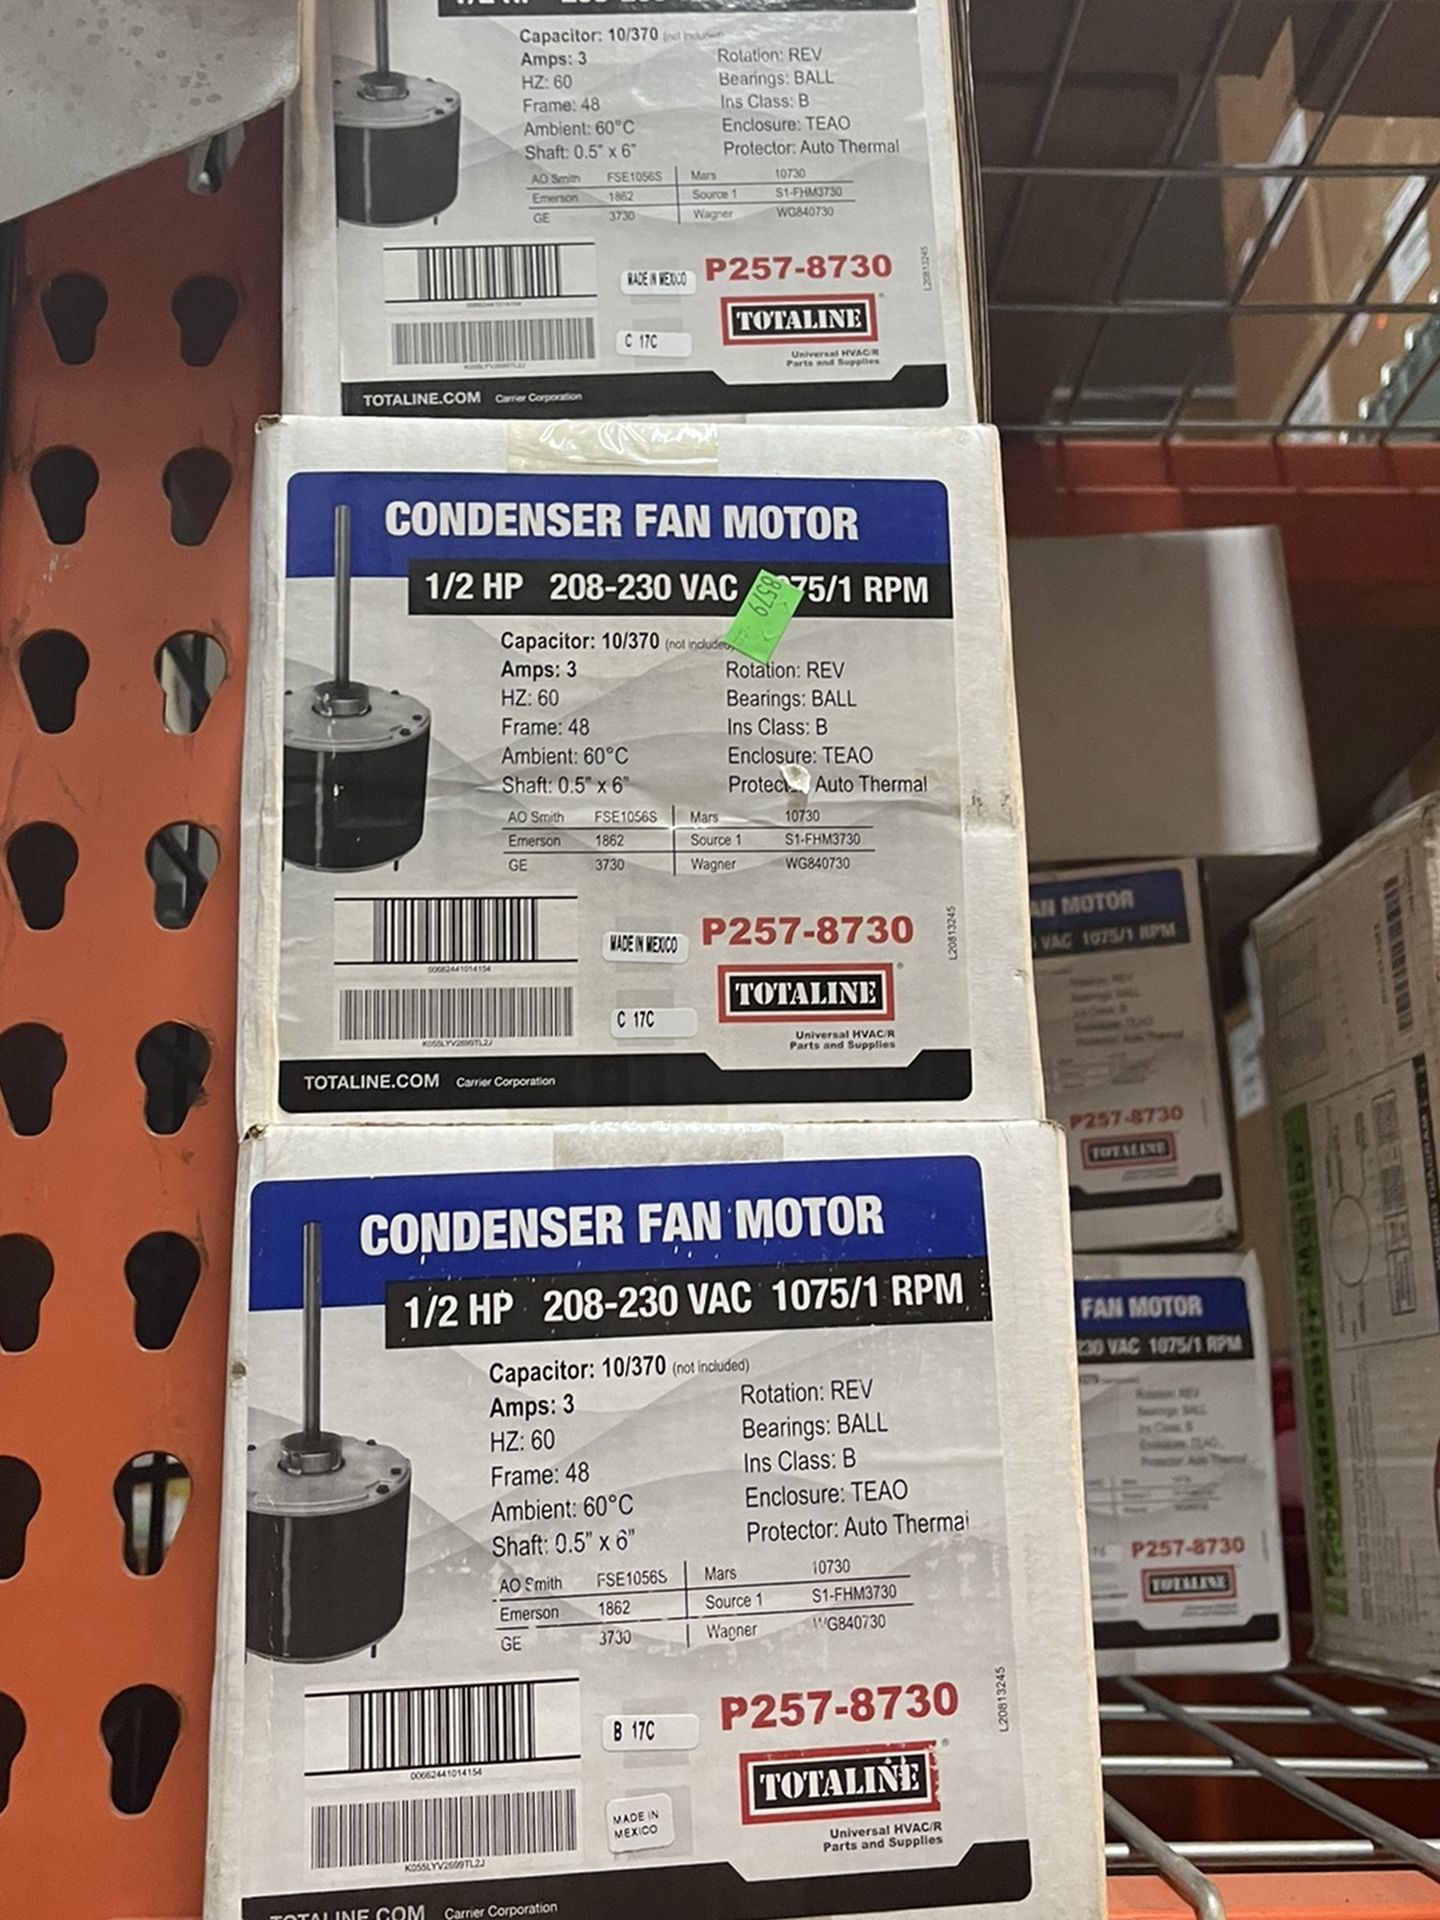 Air Conditioning Condensing Fan Motors Brand NEW 1075 Rpm 1/2 Horsepower